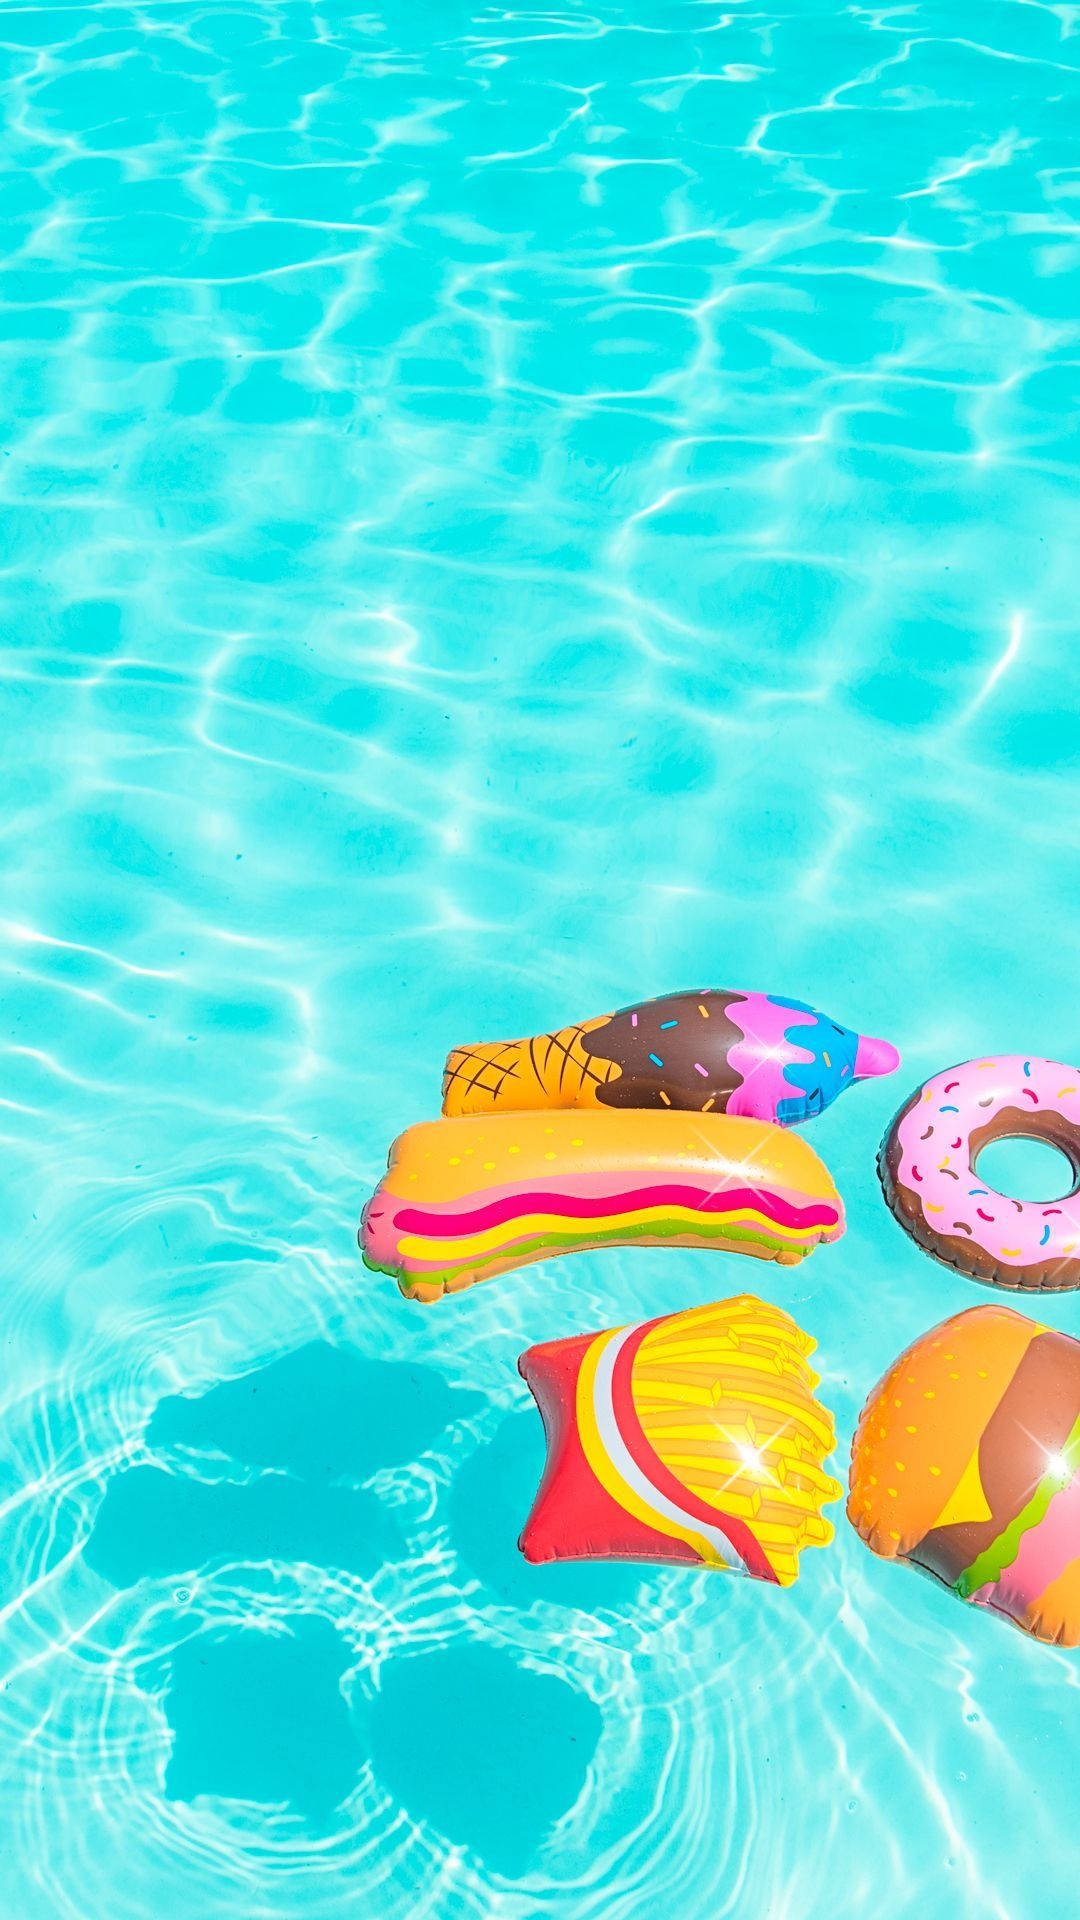 Food Inflatables In Summer